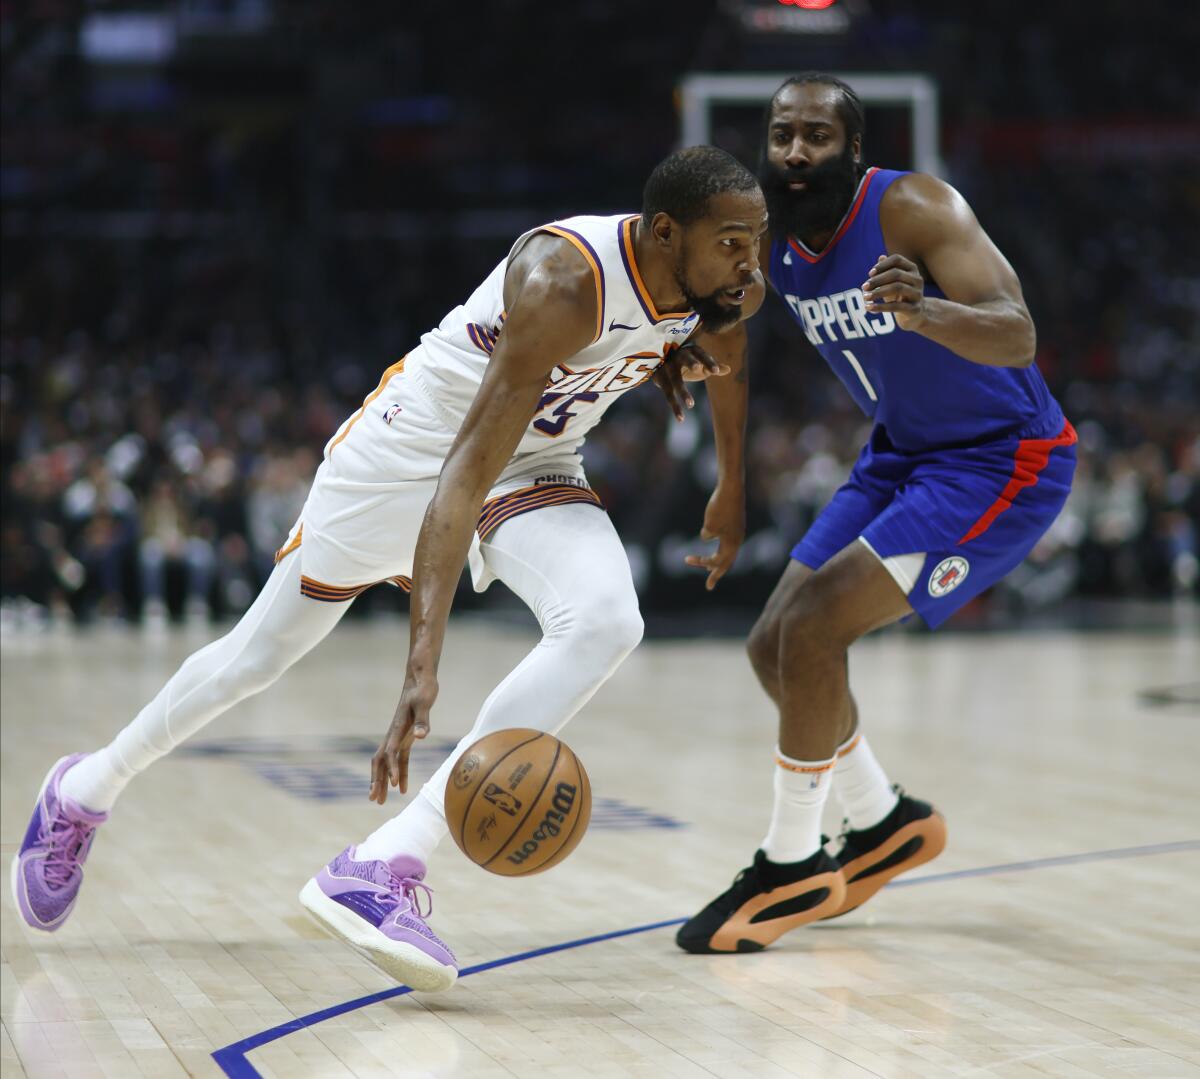 Phoenix Suns forward Kevin Durant drives past Clippers guard James Harden during the first half Monday.